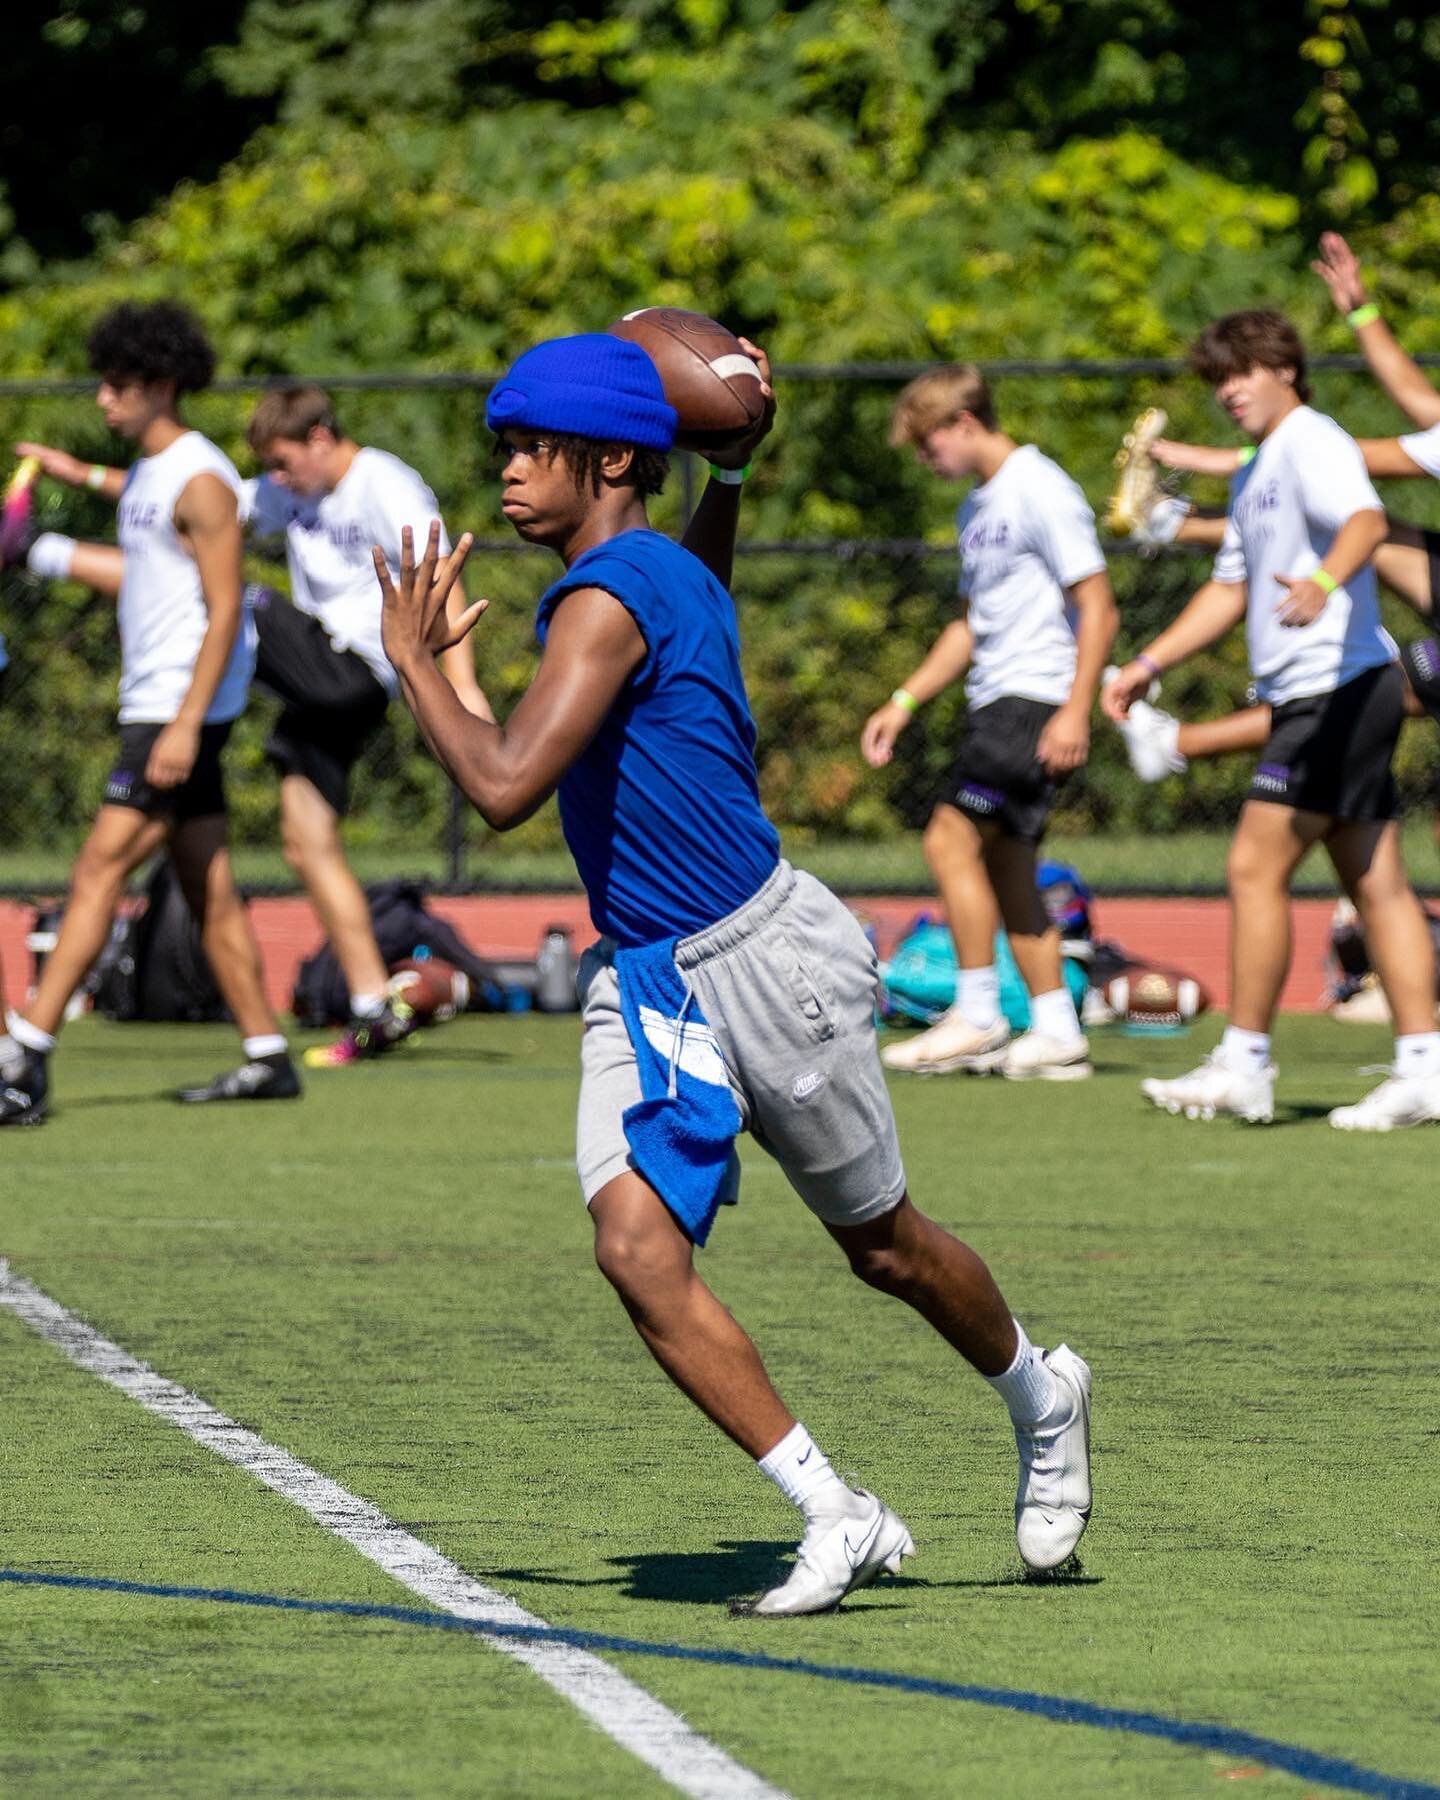 Captured some moments from the Stony Brook 7 on 7 of @eaglefootballbk , @sayvillefootball , @footballbunnell , @waterbury.career.academy , and @esm_athletic_dept. All photos can be found on our online photo gallery link in the bio!

Like, tag, or sha